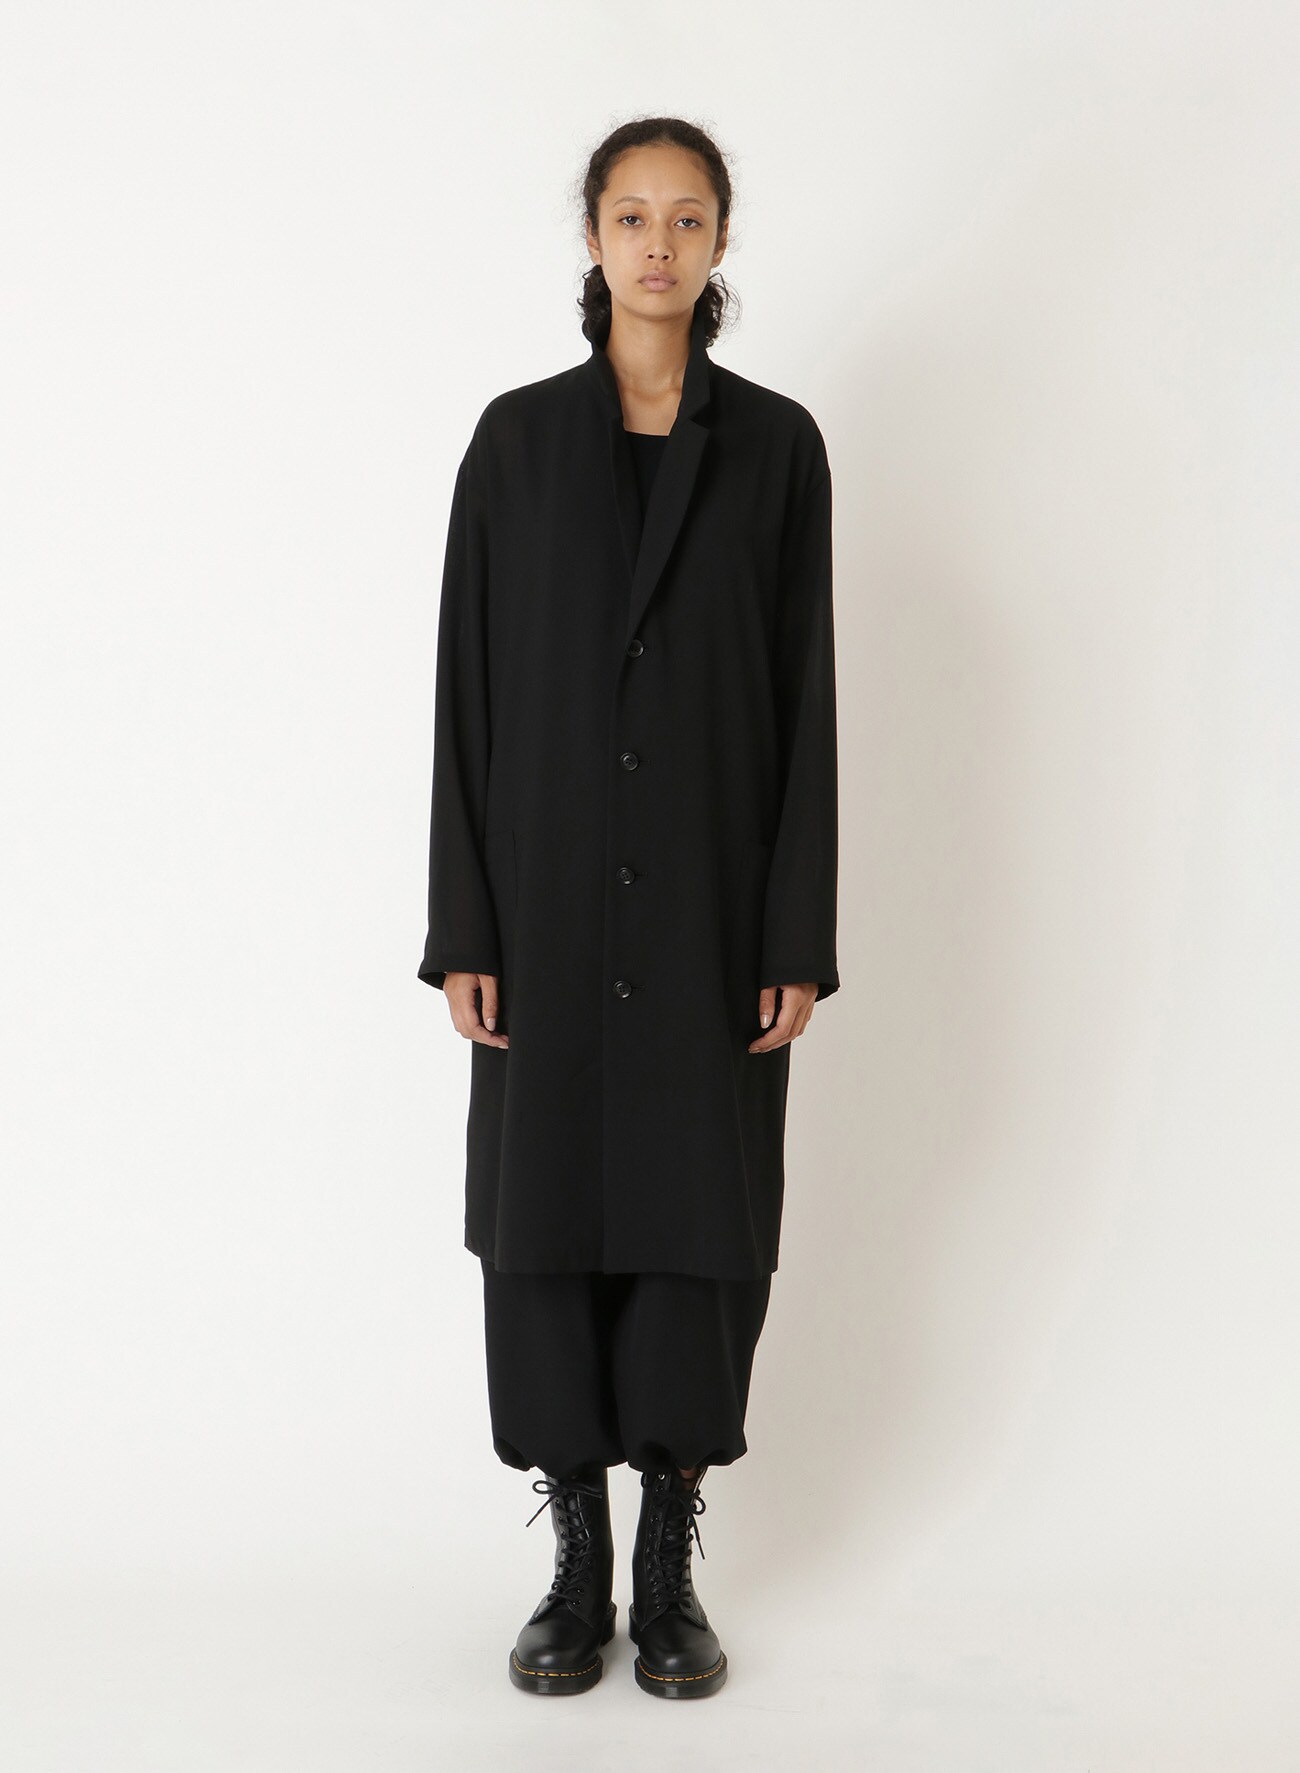 Pe/ STRONG TWISTED CLOTH LONG JACKET